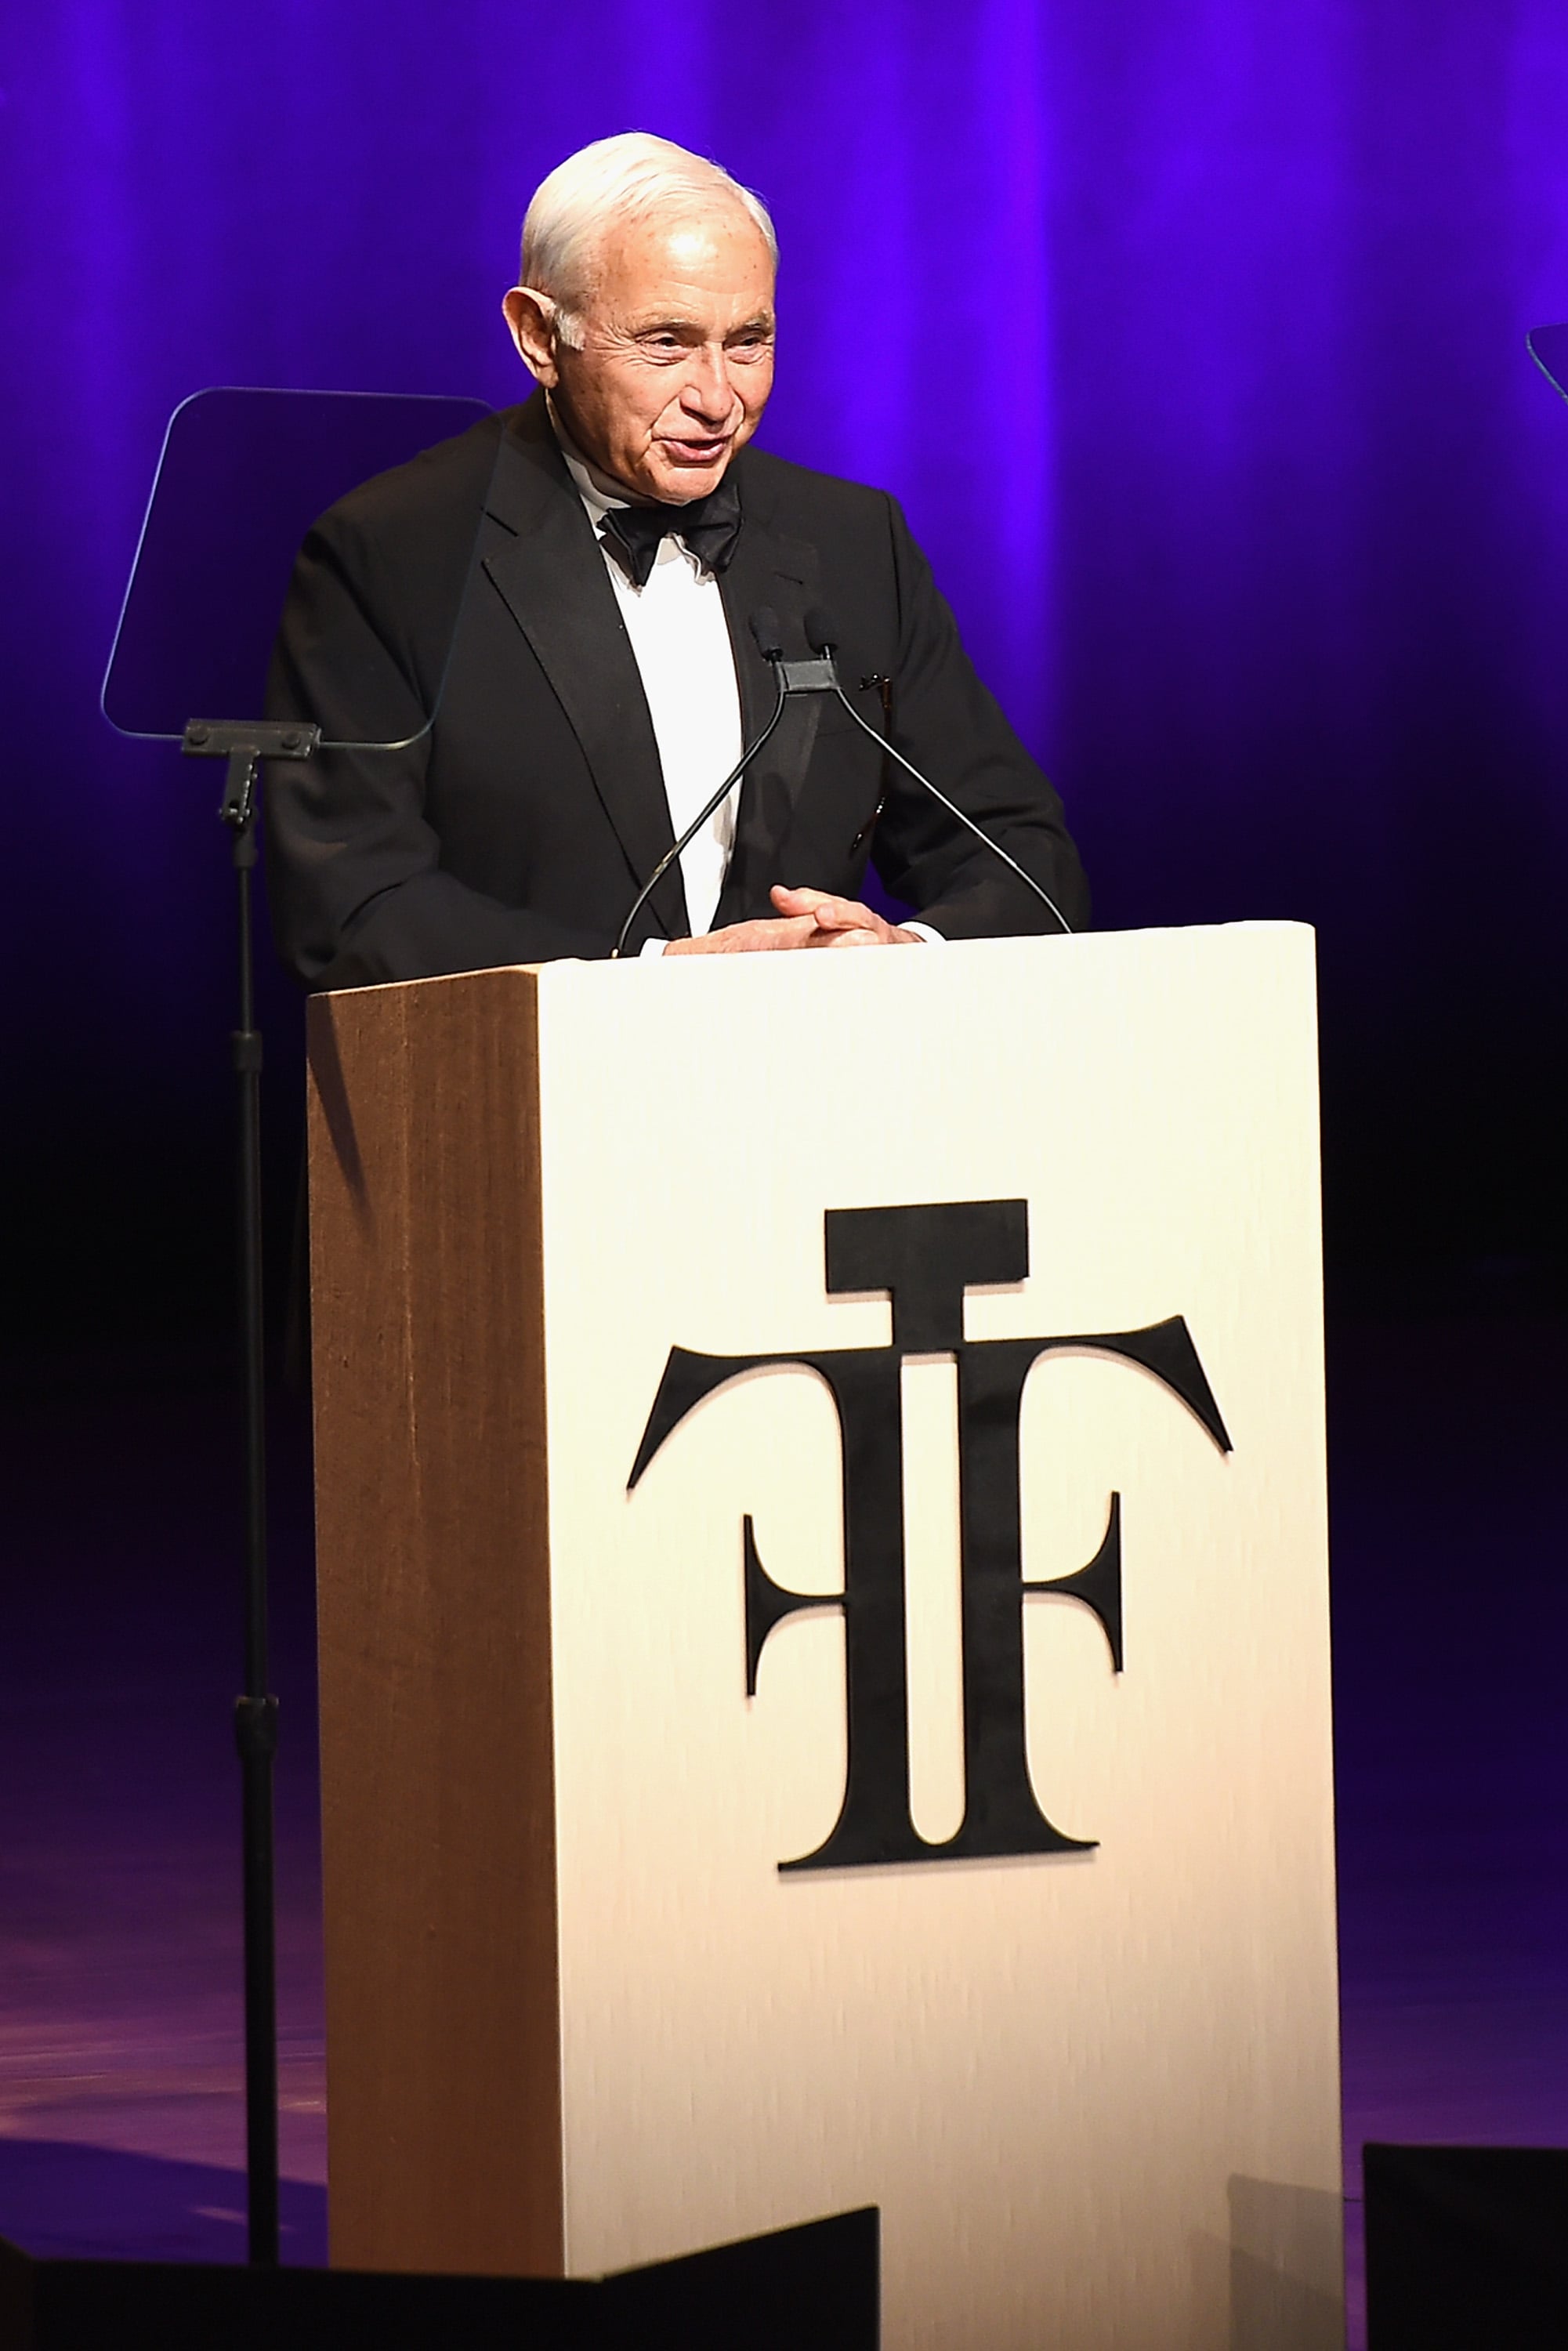 NEW YORK, NY - JUNE 07: Les Wexner speaks onstage at the 2016 Fragrance Foundation Awards presented by Hearst Magazines - Show on June 7, 2016 in New York City.  (Photo by Nicholas Hunt/Getty Images for Fragrance Foundation)